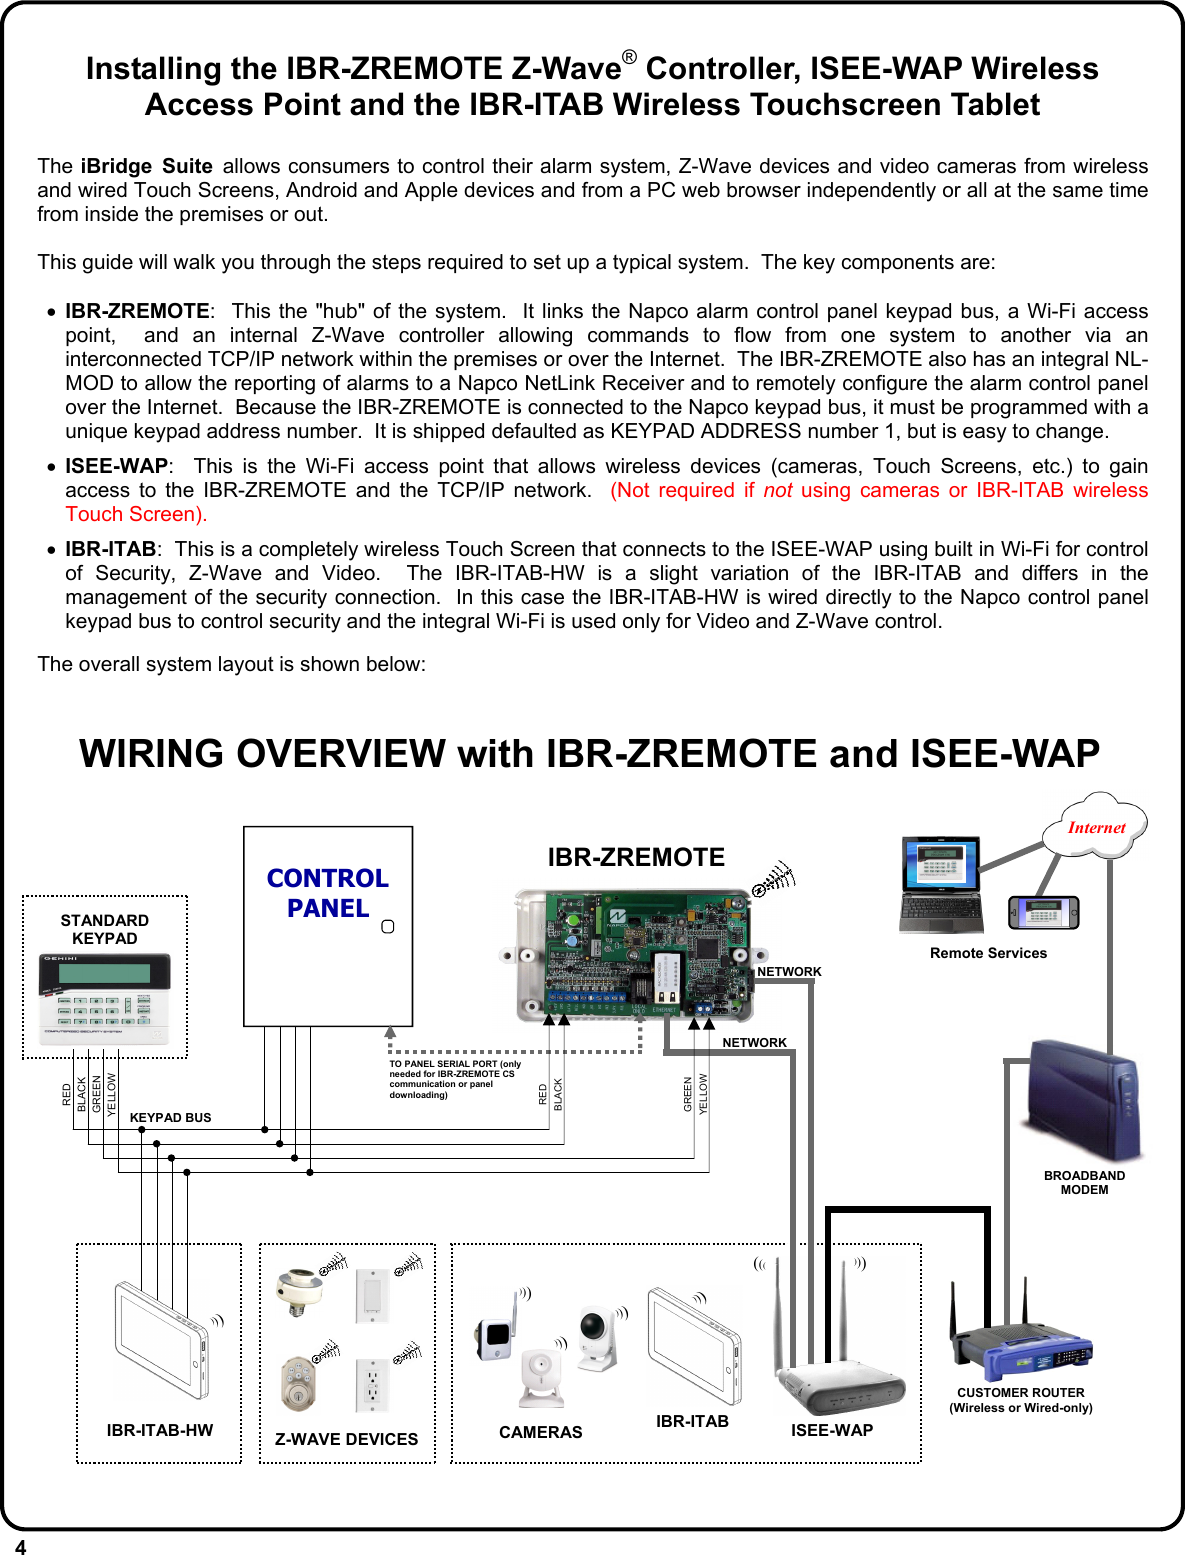 4 IBR-ZREMOTE CUSTOMER ROUTER (Wireless or Wired-only) WIRING OVERVIEW with IBR-ZREMOTE and ISEE-WAP KEYPAD BUS BROADBAND MODEM NETWORK  CONTROL PANEL STANDARD KEYPAD Internet RED BLACK GREEN YELLOW GREEN YELLOW TO PANEL SERIAL PORT (only needed for IBR-ZREMOTE CS communication or panel downloading) RED BLACK ISEE-WAP IBR-ITAB-HW  CAMERAS ((( ((( IBR-ITAB ((( ((( NETWORK ((( ((( Remote Services ((( Z-WAVE DEVICES Installing the IBR-ZREMOTE Z-Wave® Controller, ISEE-WAP Wireless Access Point and the IBR-ITAB Wireless Touchscreen Tablet  The iBridge Suite allows consumers to control their alarm system, Z-Wave devices and video cameras from wireless and wired Touch Screens, Android and Apple devices and from a PC web browser independently or all at the same time from inside the premises or out.  This guide will walk you through the steps required to set up a typical system.  The key components are:  •  IBR-ZREMOTE:  This the &quot;hub&quot; of the system.  It links the Napco alarm control panel keypad bus, a Wi-Fi access point,  and an internal Z-Wave controller allowing commands to flow from one system to another via an interconnected TCP/IP network within the premises or over the Internet.  The IBR-ZREMOTE also has an integral NL-MOD to allow the reporting of alarms to a Napco NetLink Receiver and to remotely configure the alarm control panel over the Internet.  Because the IBR-ZREMOTE is connected to the Napco keypad bus, it must be programmed with a unique keypad address number.  It is shipped defaulted as KEYPAD ADDRESS number 1, but is easy to change.  •  ISEE-WAP:  This is the Wi-Fi access point that allows wireless devices (cameras, Touch Screens, etc.) to gain access to the IBR-ZREMOTE and the TCP/IP network.  (Not required if not  using cameras or IBR-ITAB wireless Touch Screen).  •  IBR-ITAB:  This is a completely wireless Touch Screen that connects to the ISEE-WAP using built in Wi-Fi for control of Security, Z-Wave and Video.  The IBR-ITAB-HW is a slight variation of the IBR-ITAB and differs in the management of the security connection.  In this case the IBR-ITAB-HW is wired directly to the Napco control panel keypad bus to control security and the integral Wi-Fi is used only for Video and Z-Wave control.  The overall system layout is shown below: 